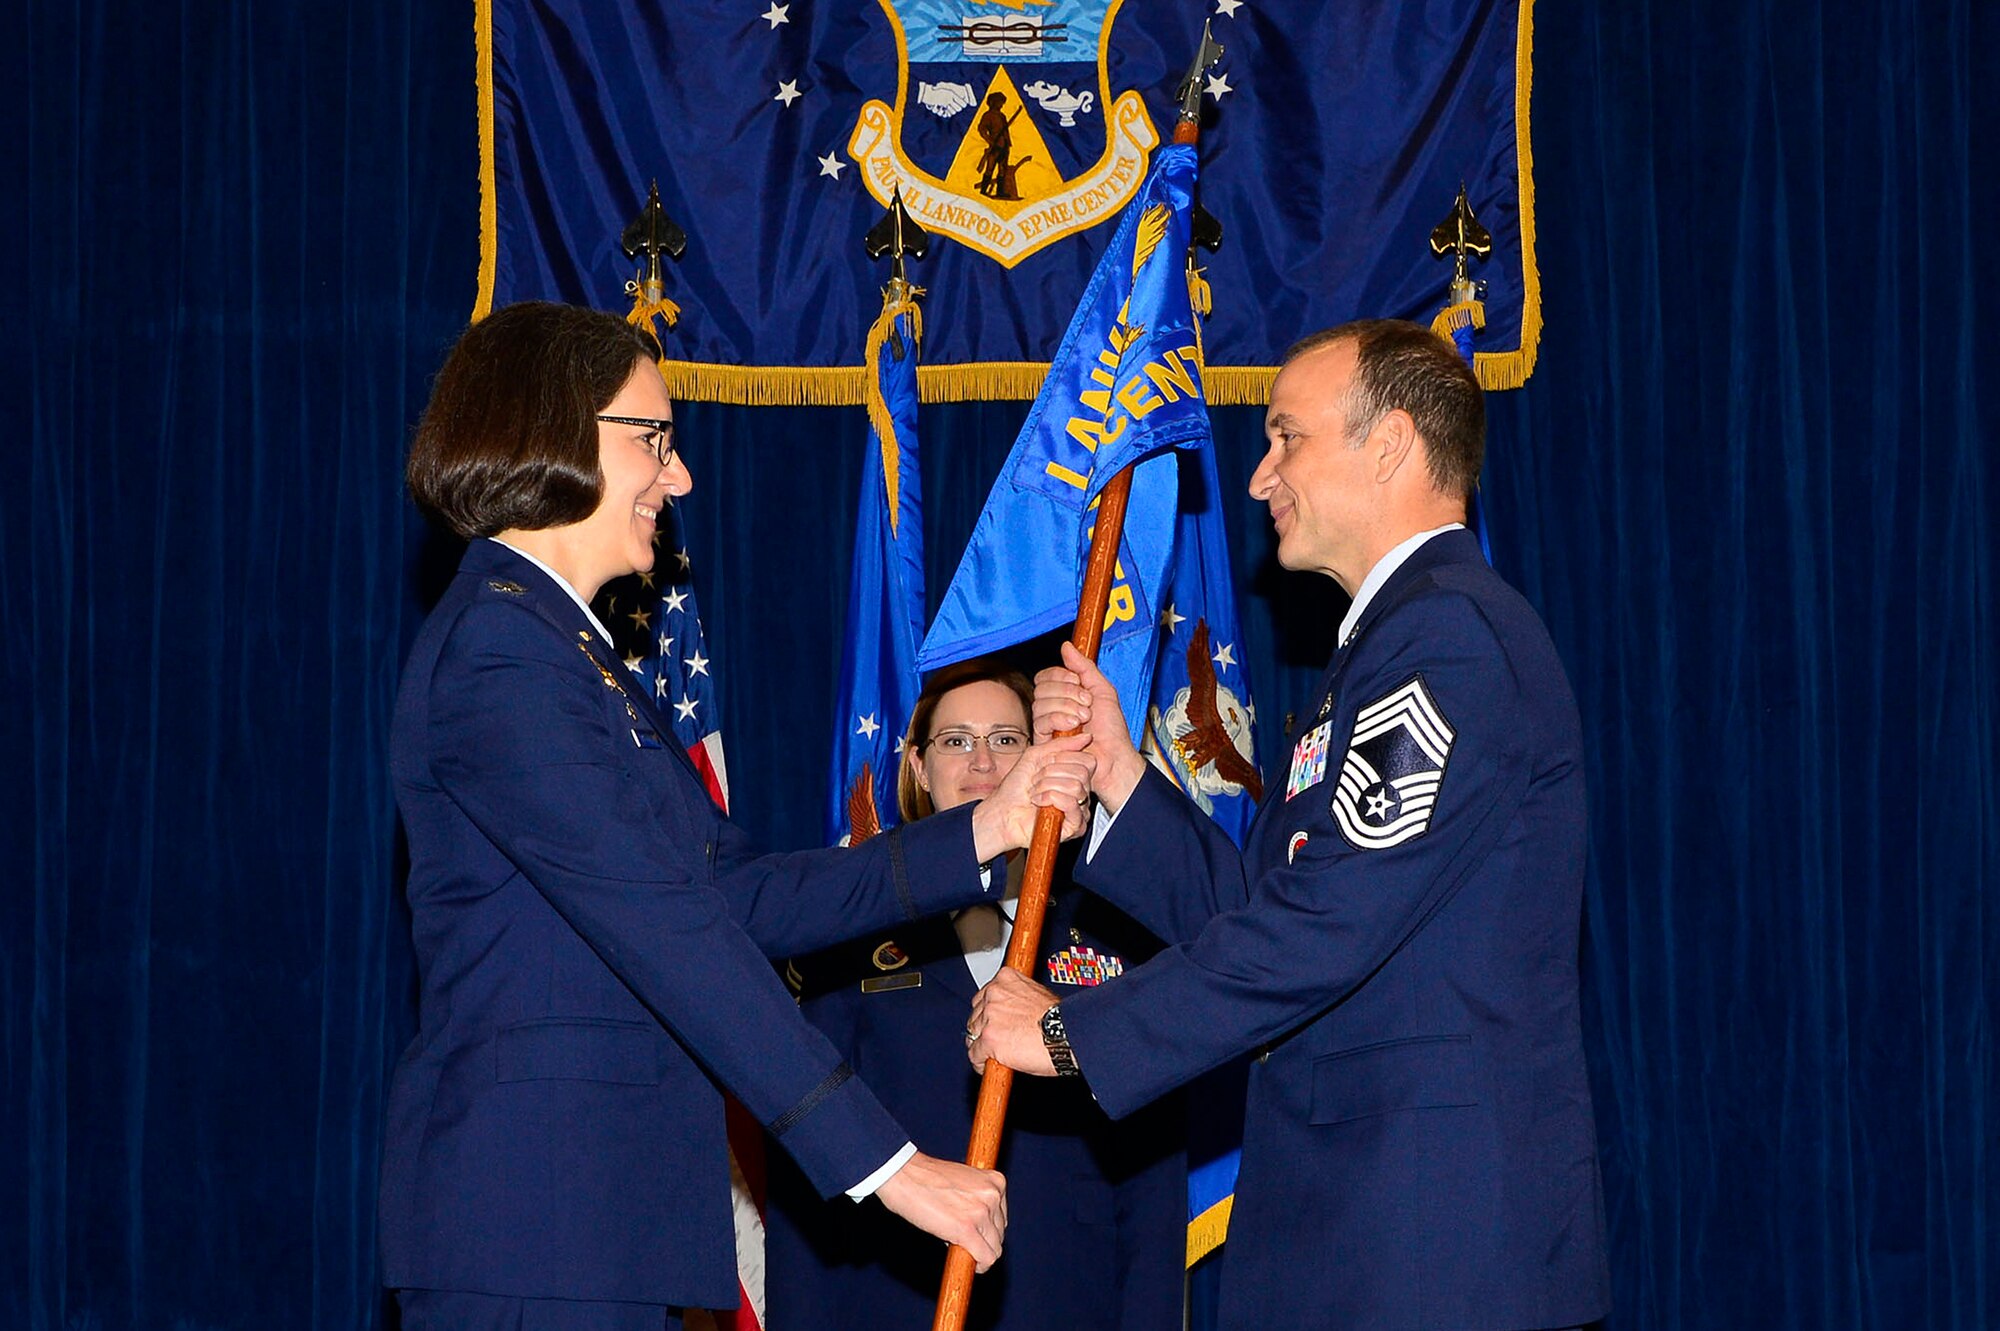 MCGHEE TYSON AIR NATIONAL GUARD BASE, Tenn. - Col. Jessica Meyeraan, commander, hands the guidon to the 14th Commandant of the Paul H. Lankford Enlisted PME Center, I.G. Brown Training and Education Center, Chief Master Sgt. Edward L. Walden, Sr. in Wilson Hall here May 20, 2015, during an assumption ceremony. (U.S. Air National Guard photo by Master Sgt. Jerry Harlan/Released)